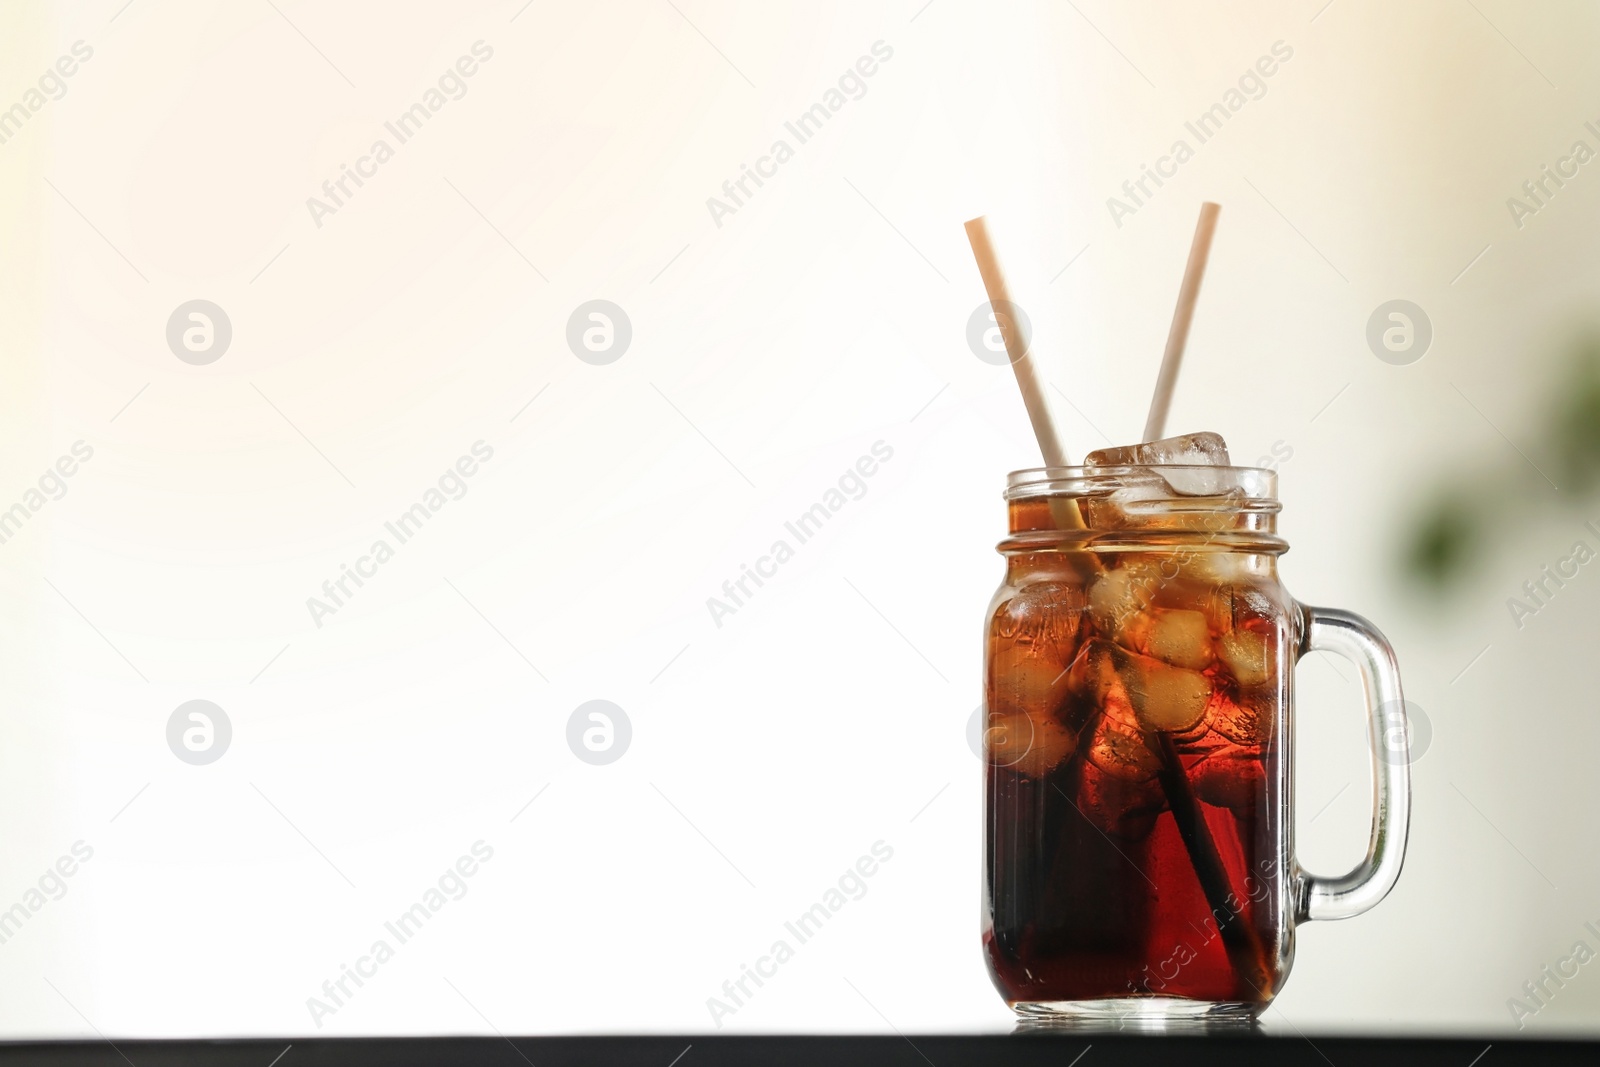 Photo of Mason jar of cola with ice on table against blurred background. Space for text